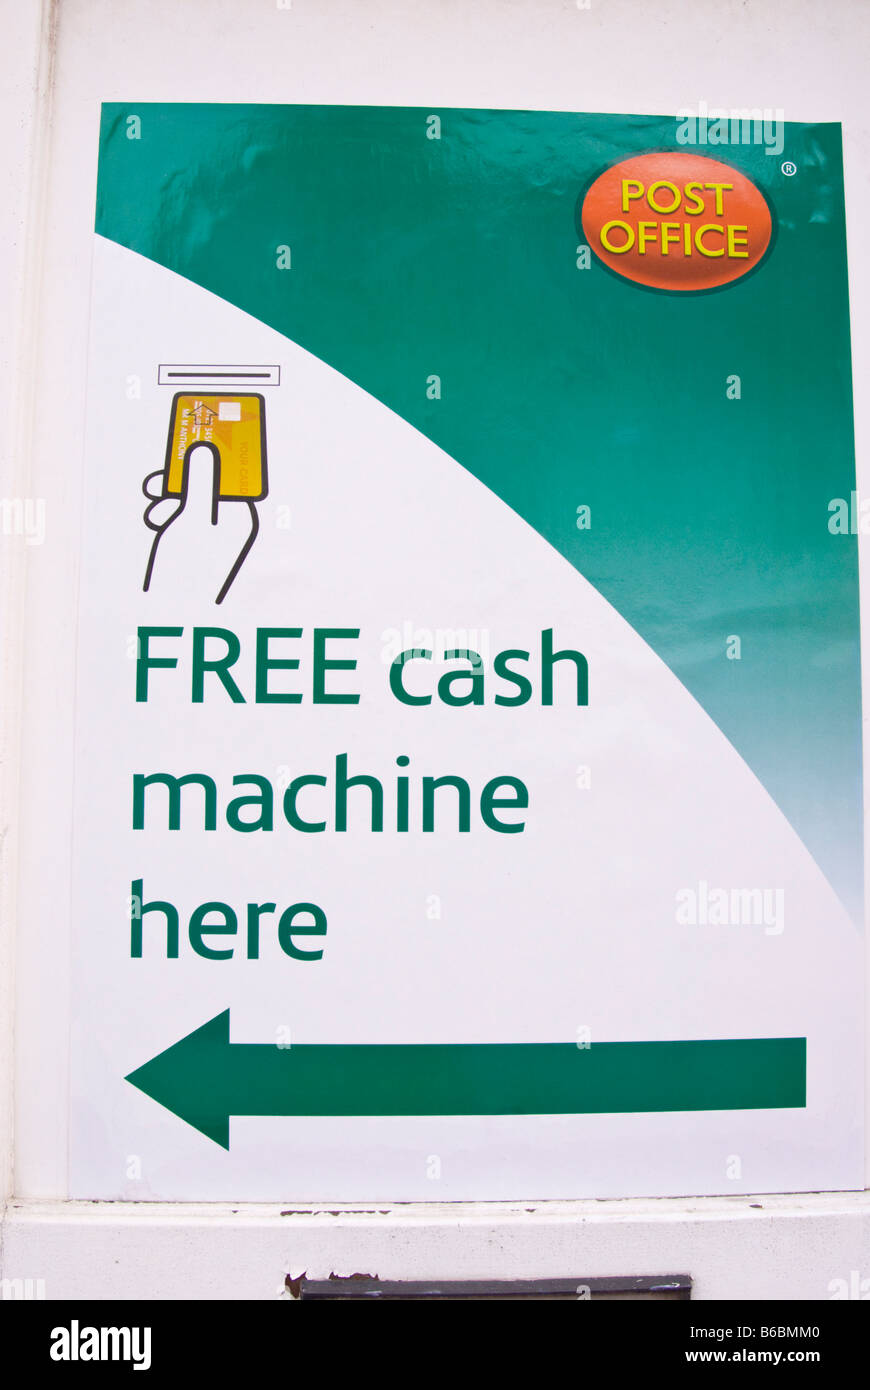 Free cash machine here sign at Post Office in Uk Stock Photo